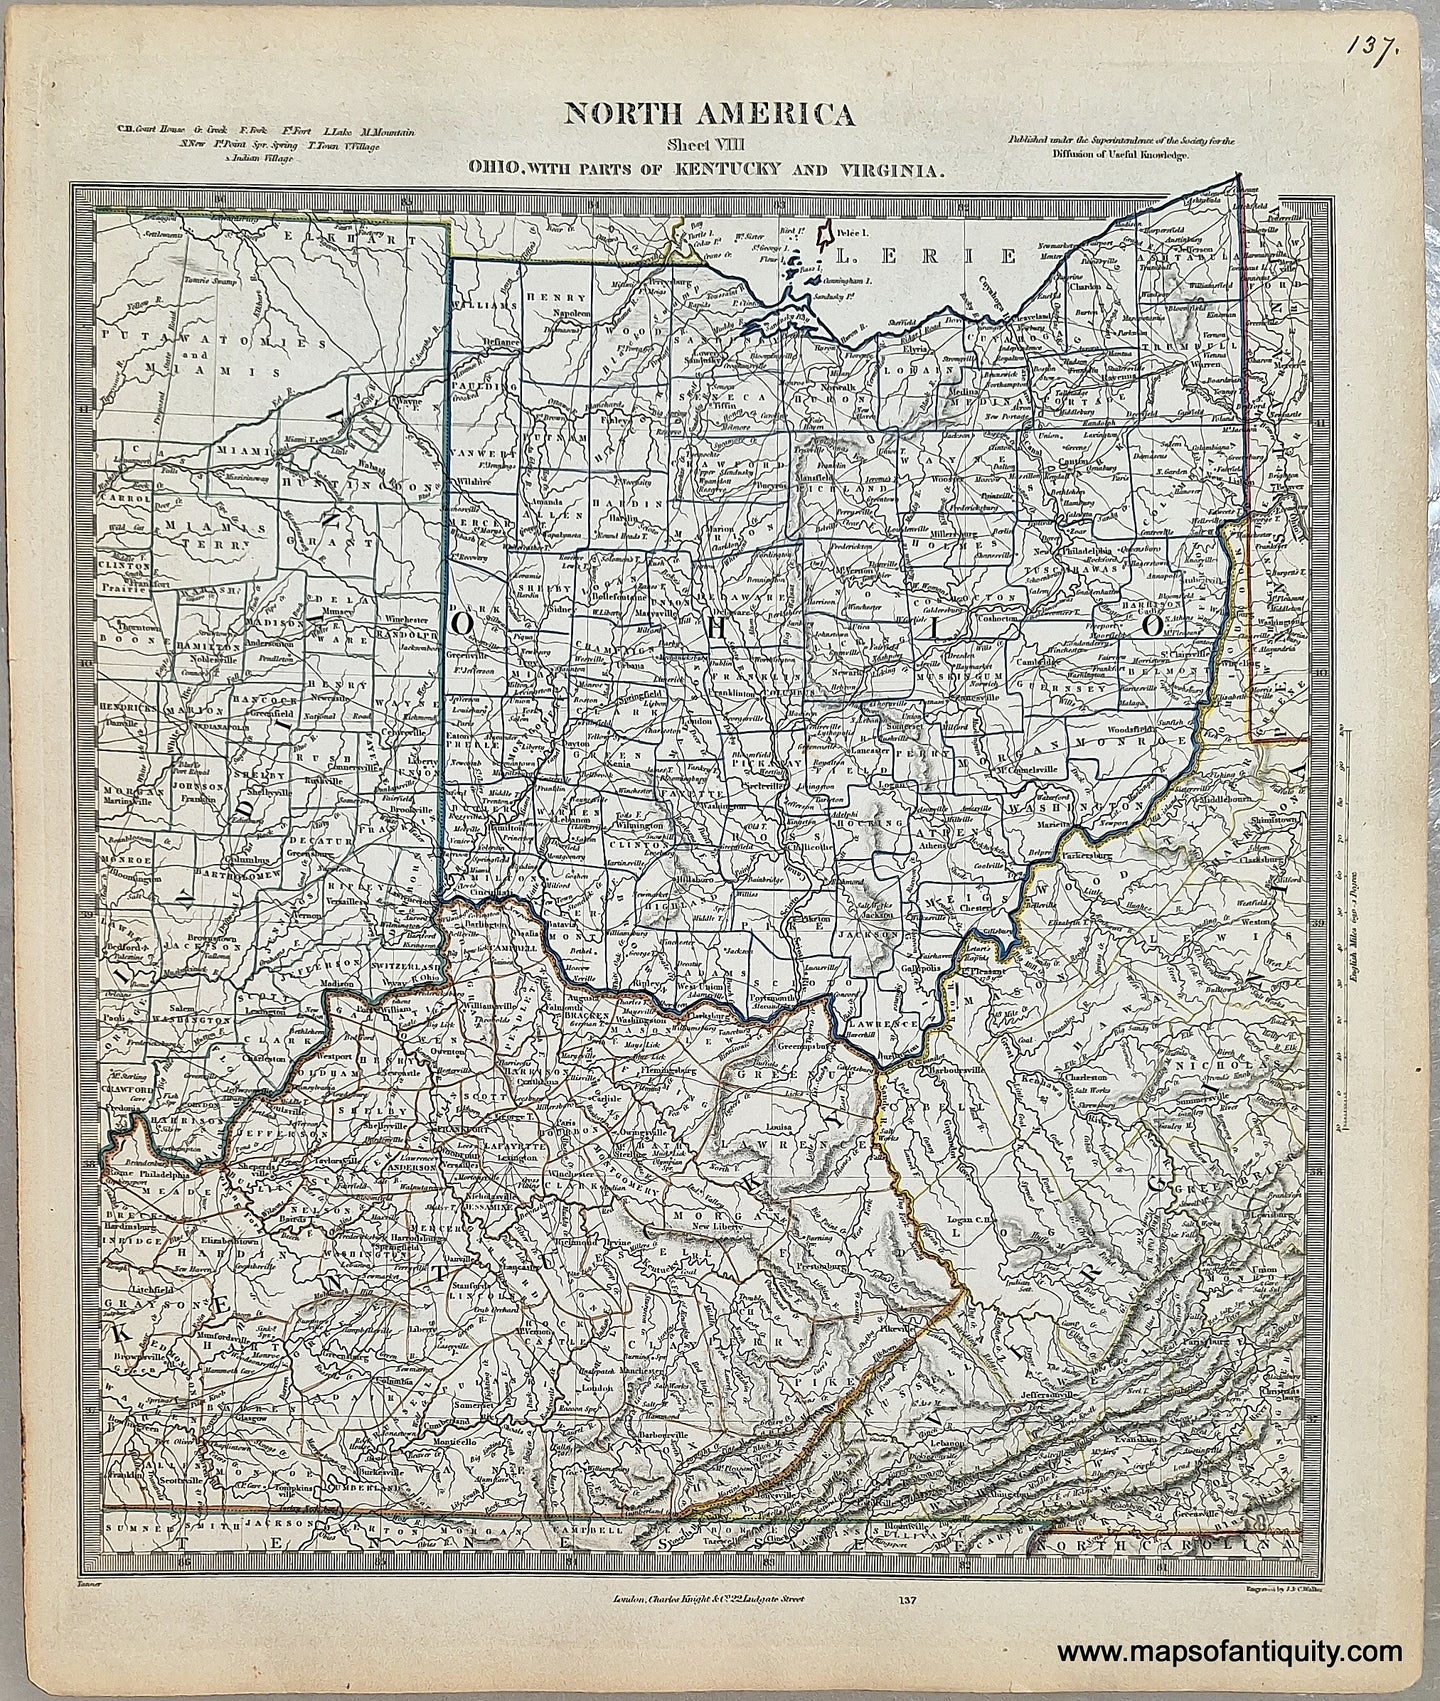 Antique-Map-North-America-Sheet-VIII-Ohio-with-parts-of-Kentucky-and-Virginia